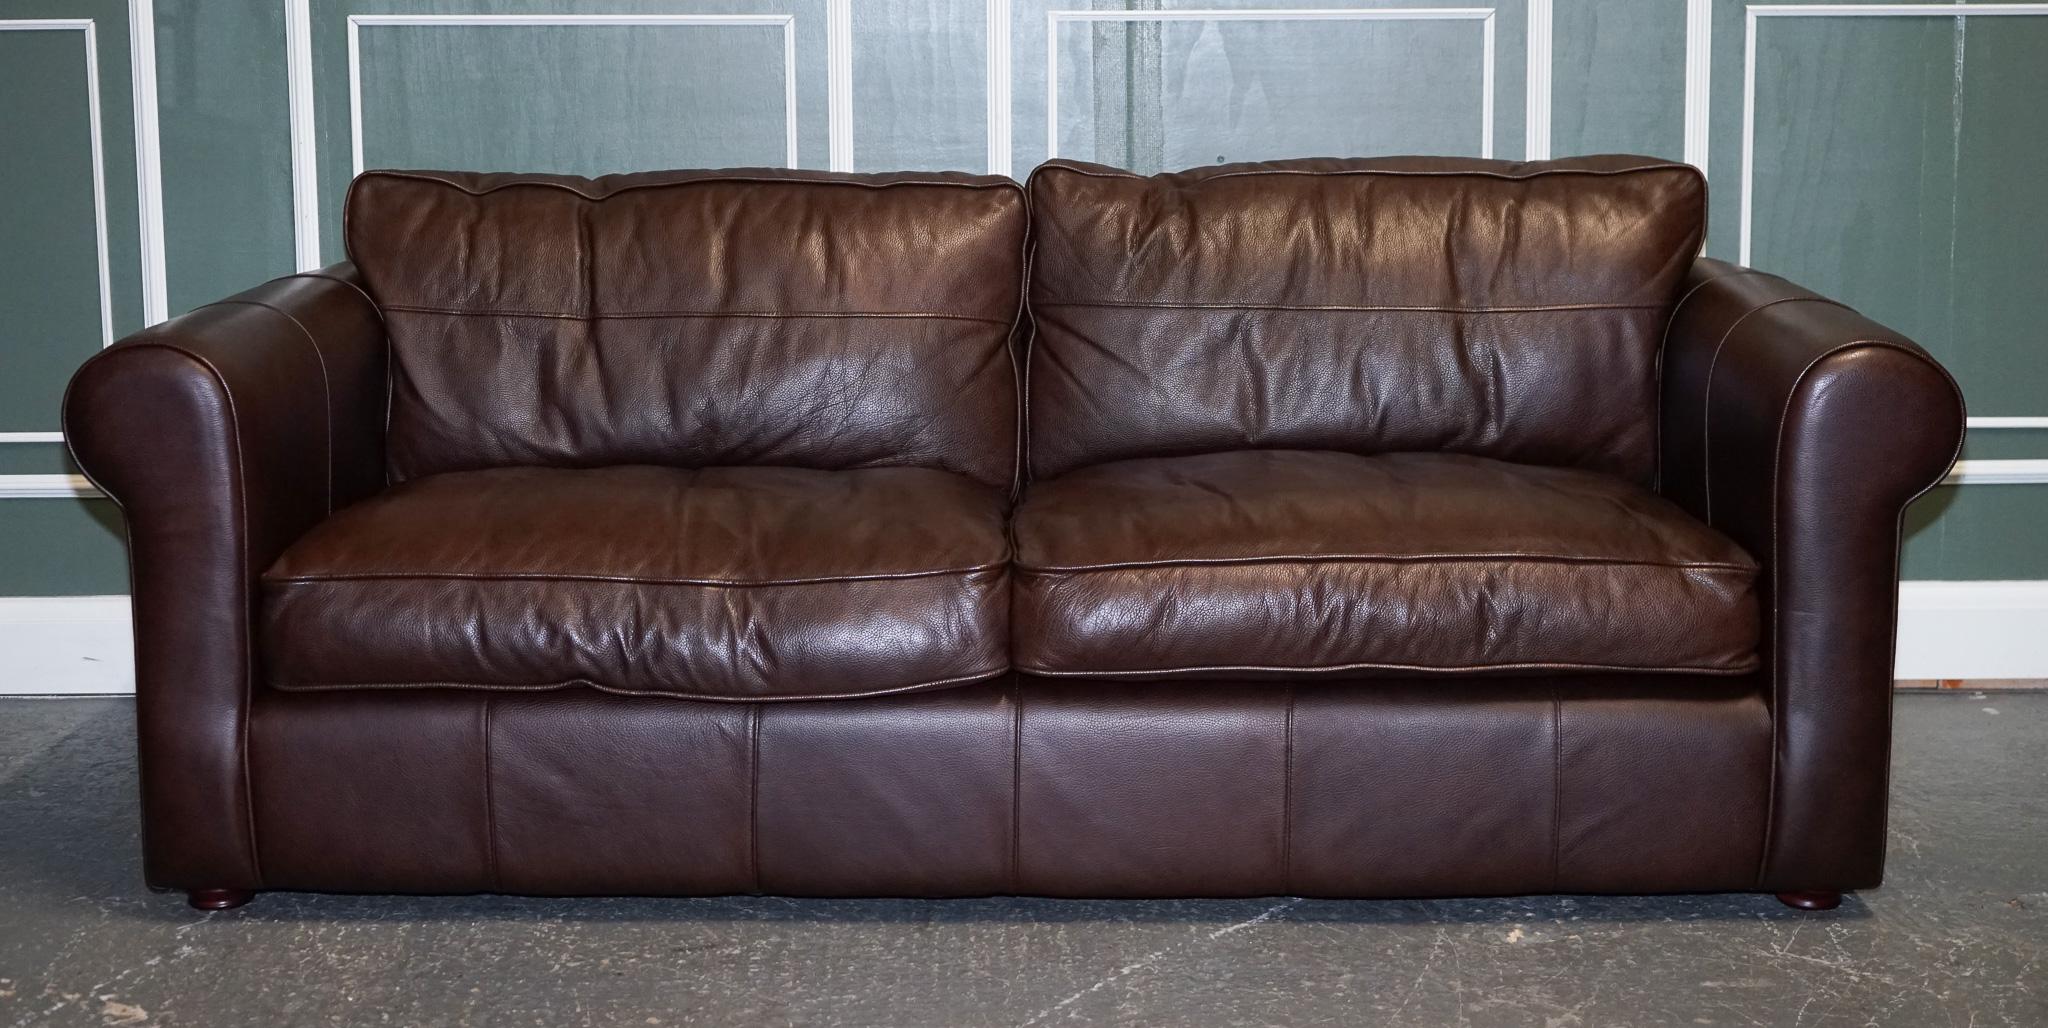 We are excited to offer for sale this stunning Thomas Lloyd brown leather three-seater sofa.

A very comfortable sofa that fits two to three people.
Made by Thomas Lloyd which is a very well-known established English maker.

We have deep